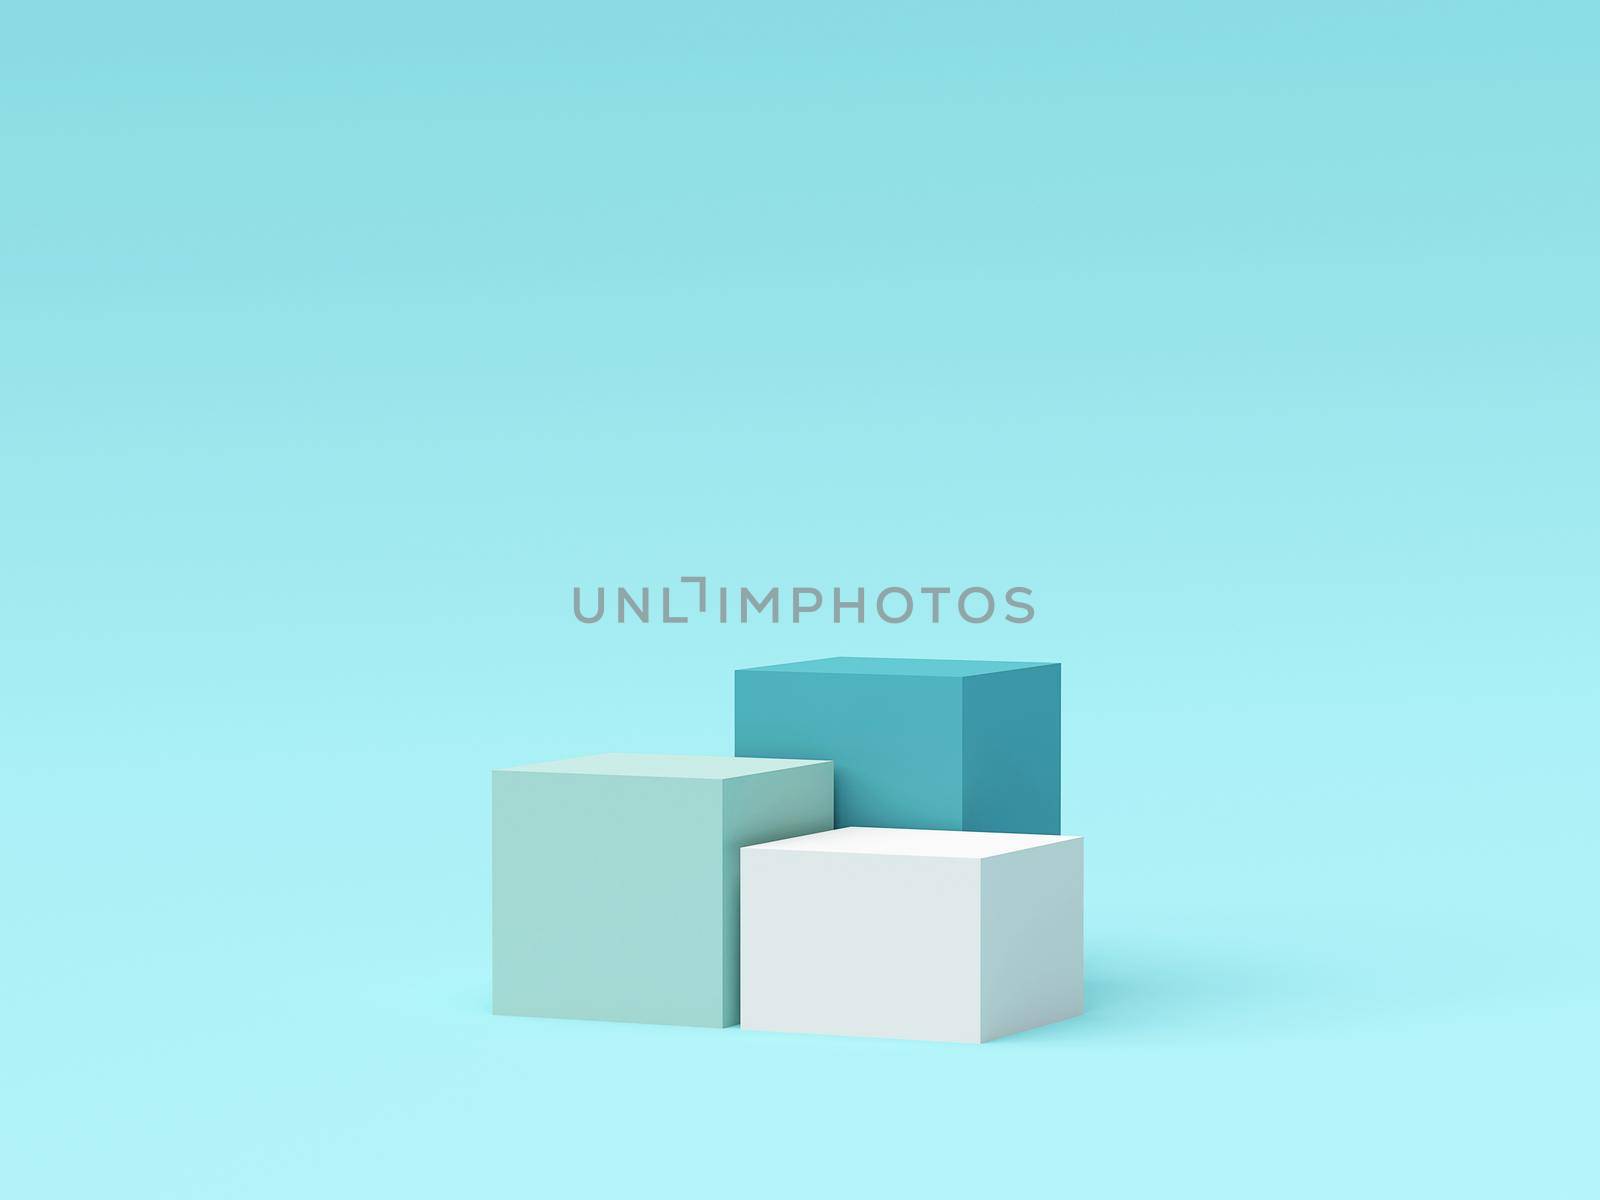 Scene of pastel color geometric shape podium for product advertisement, 3d rendering